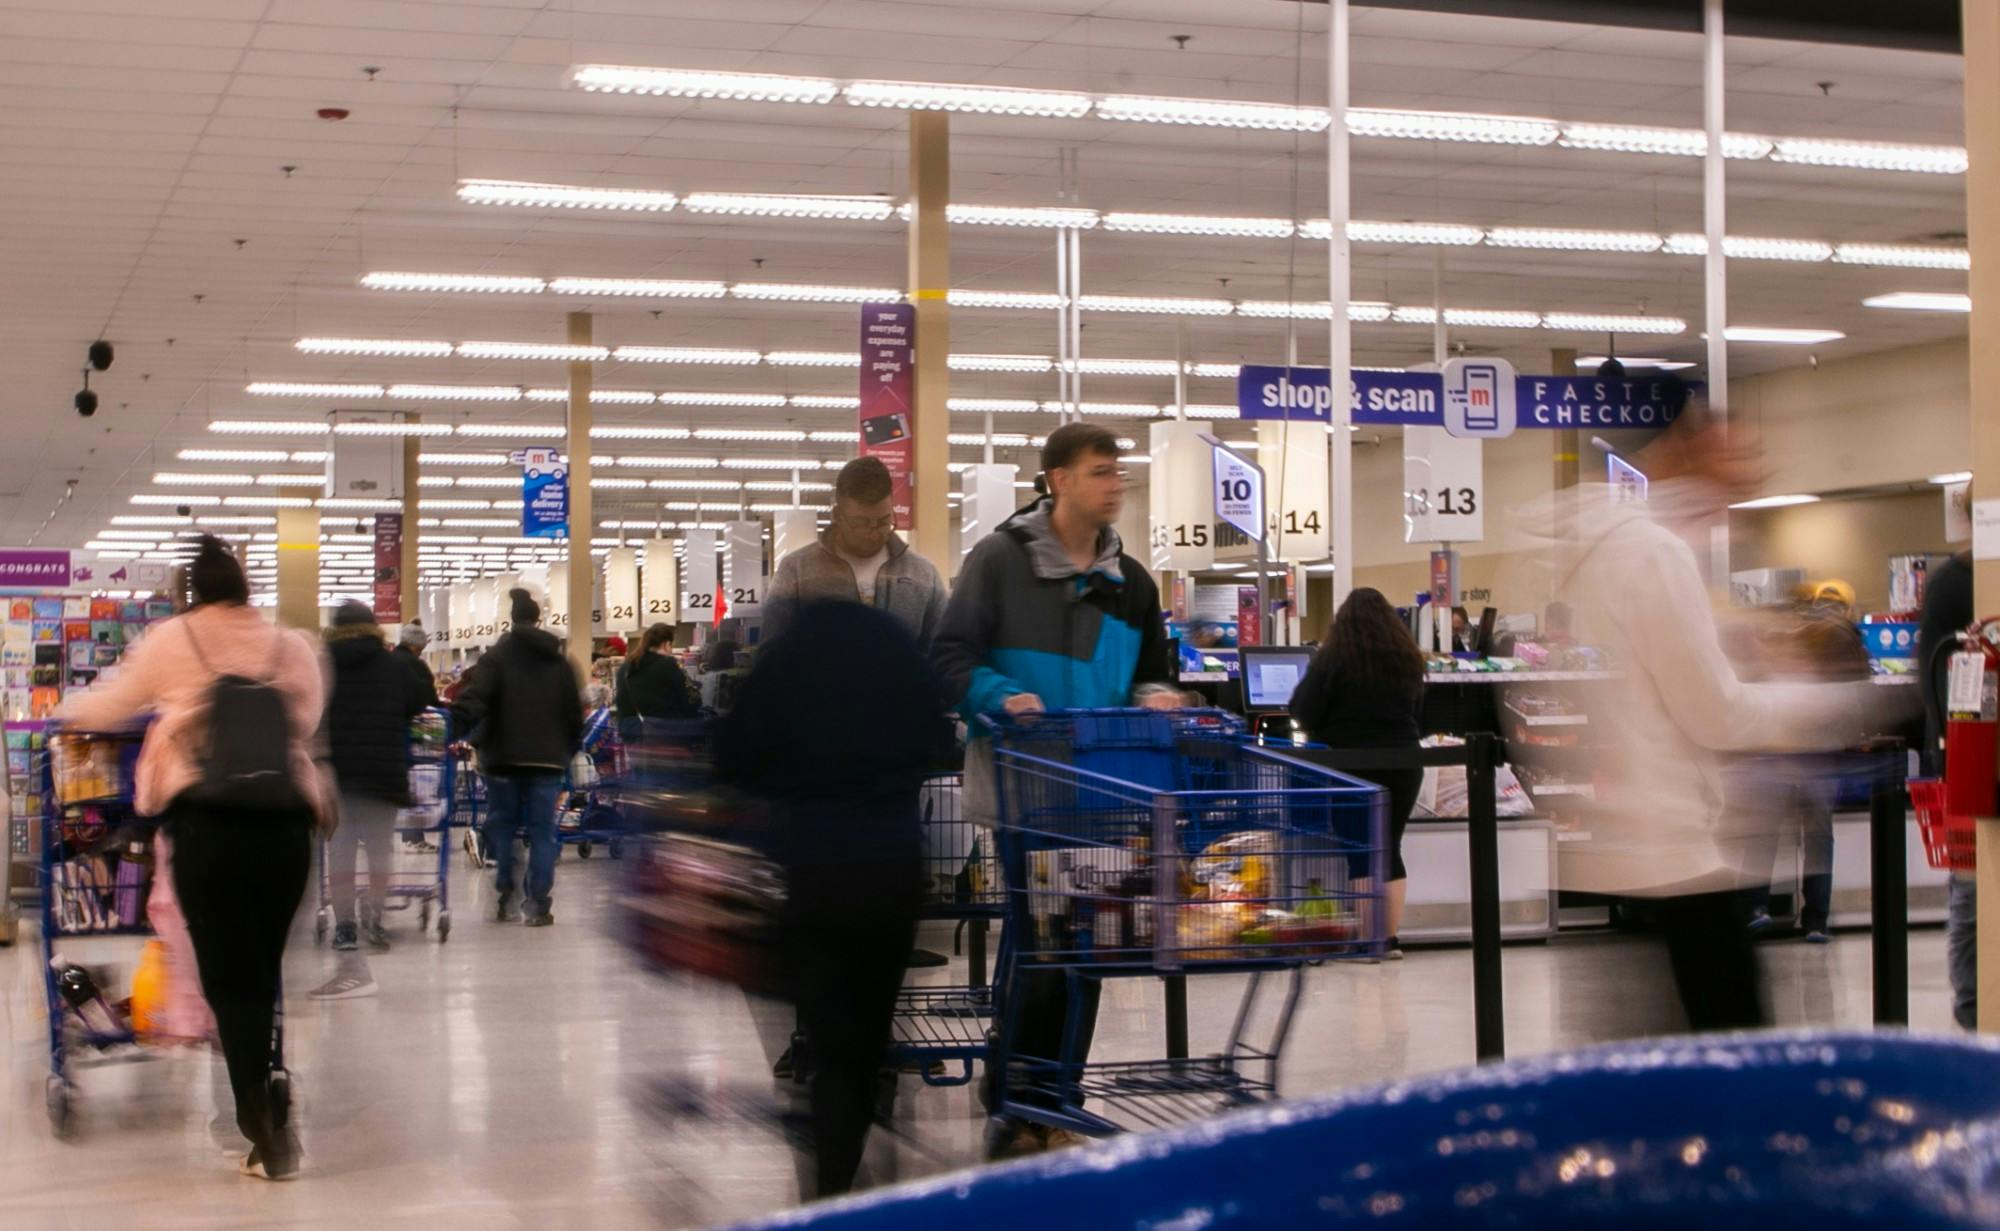 <p>People walk around the checkout aisles at Meijer on March 12, 2020, after MSU canceled classes due to coronavirus.</p>